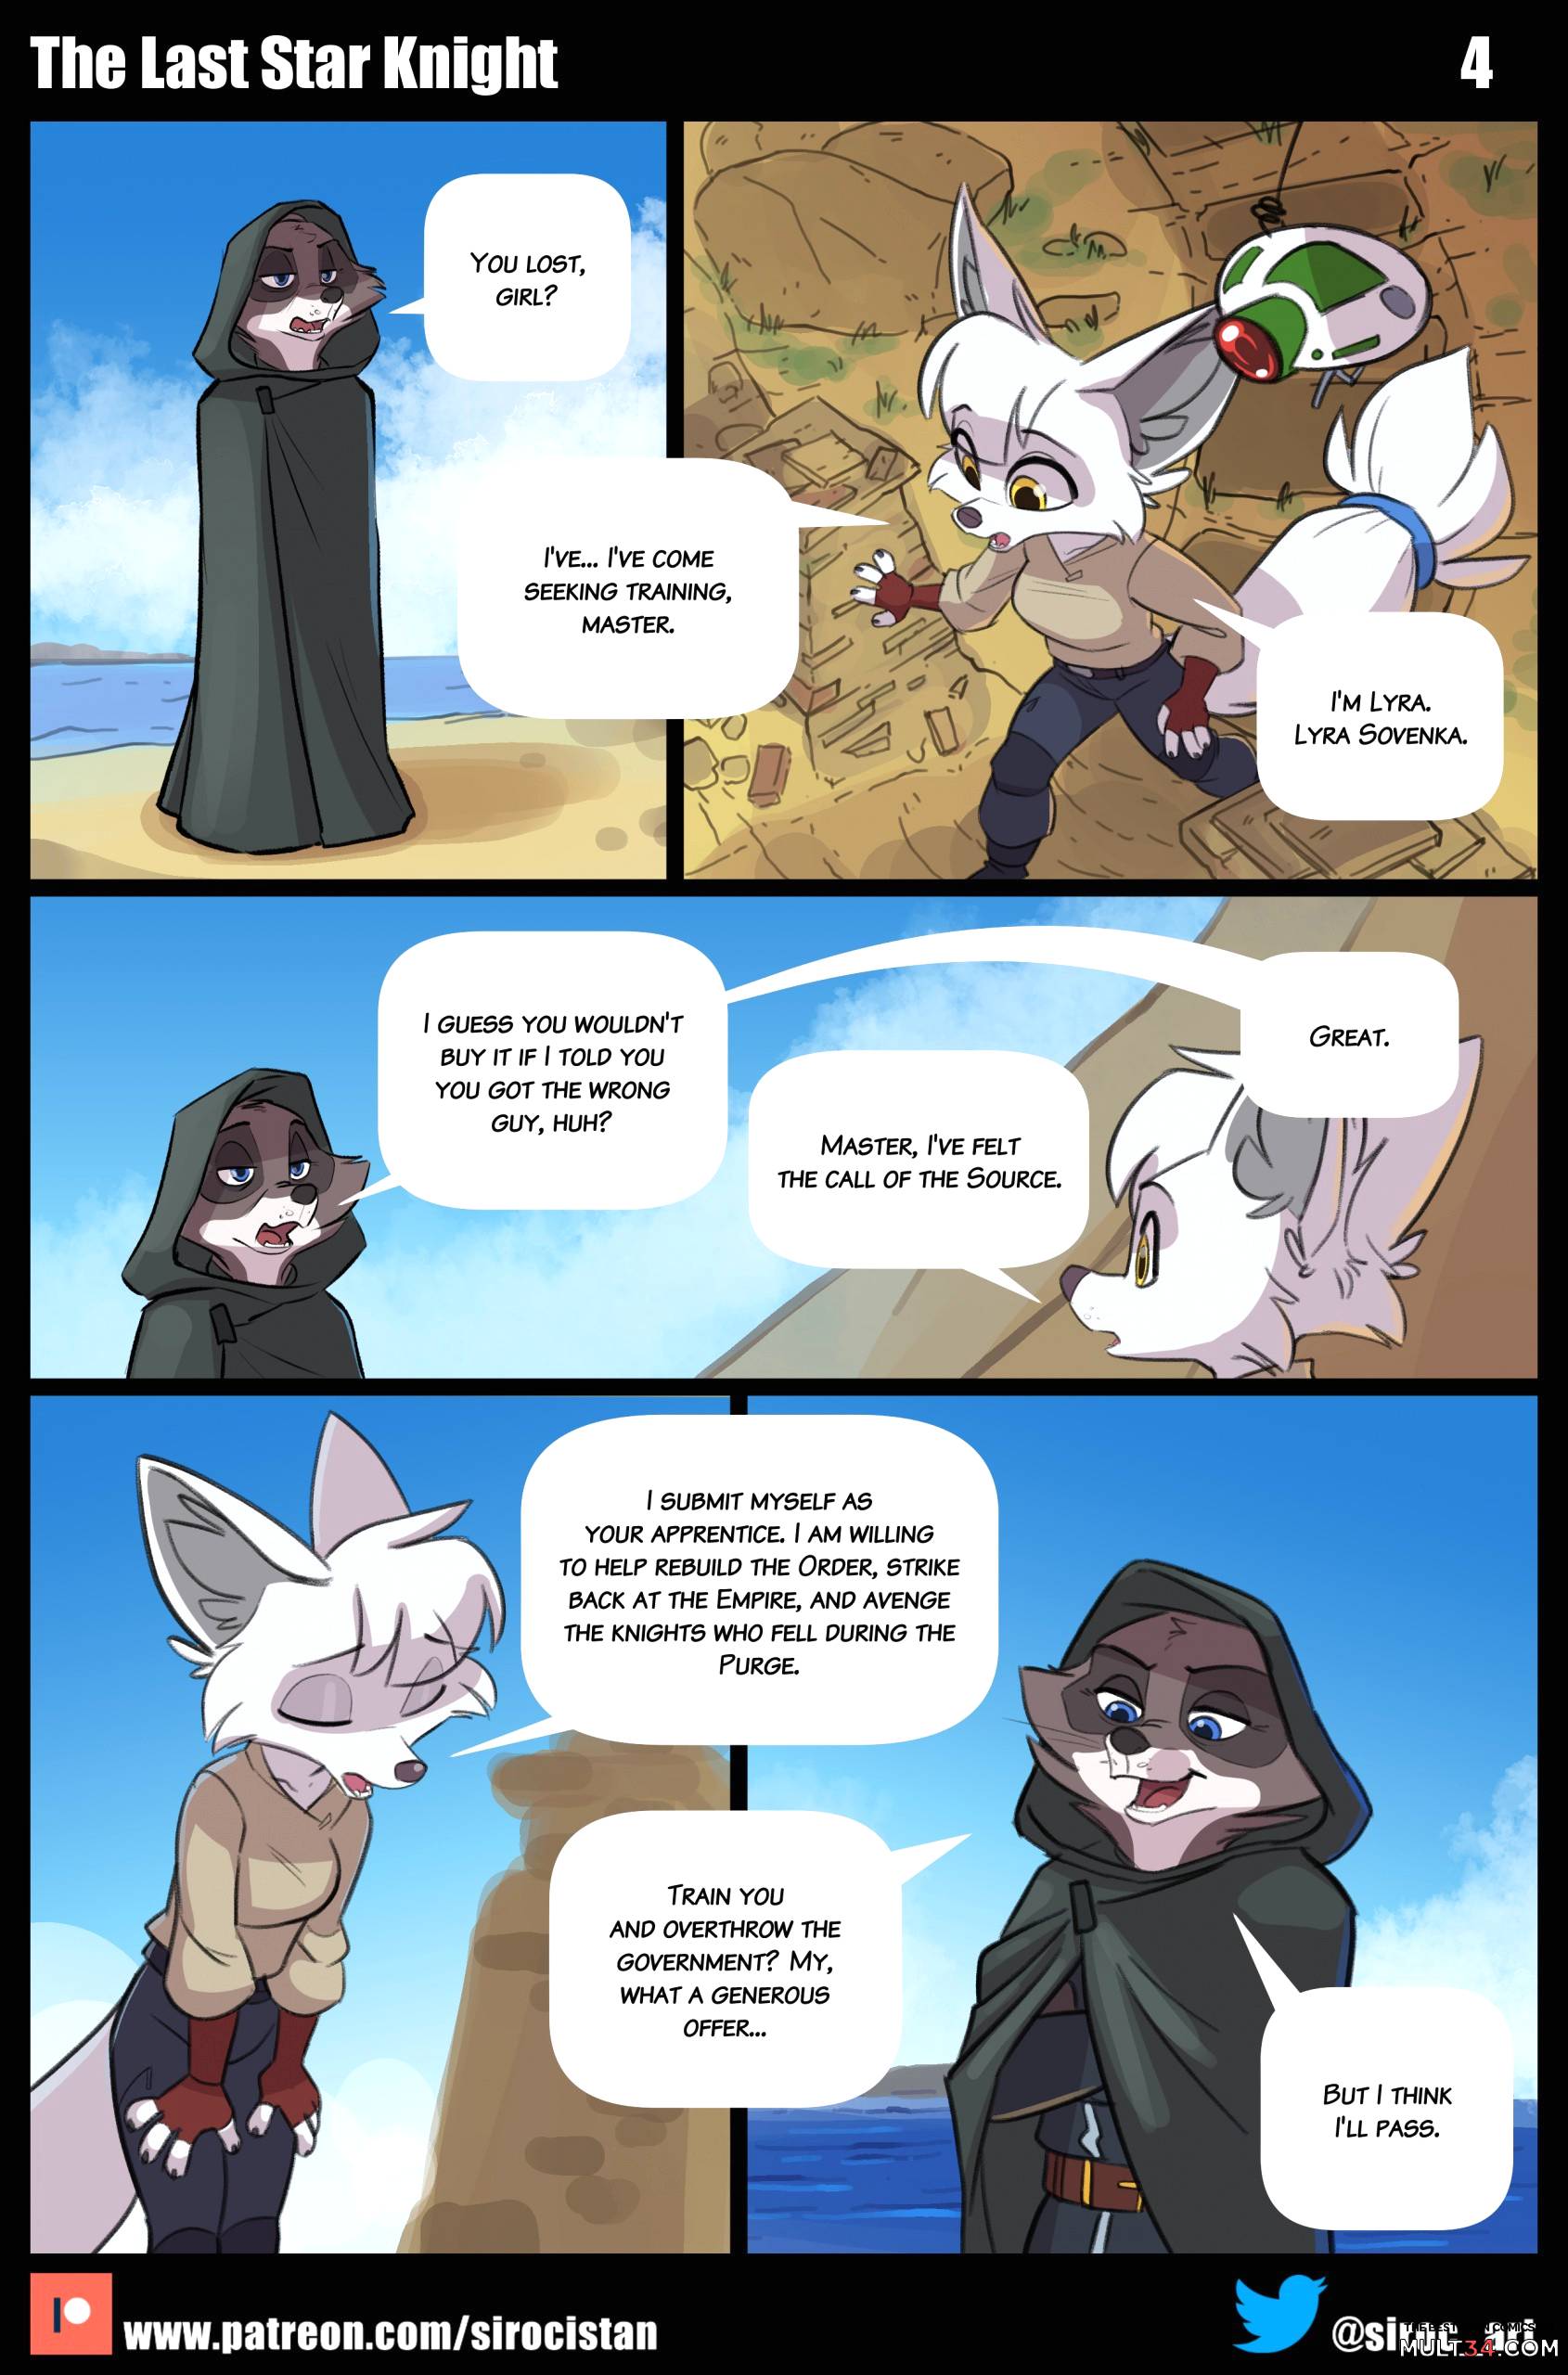 The Last Star Knight page 4